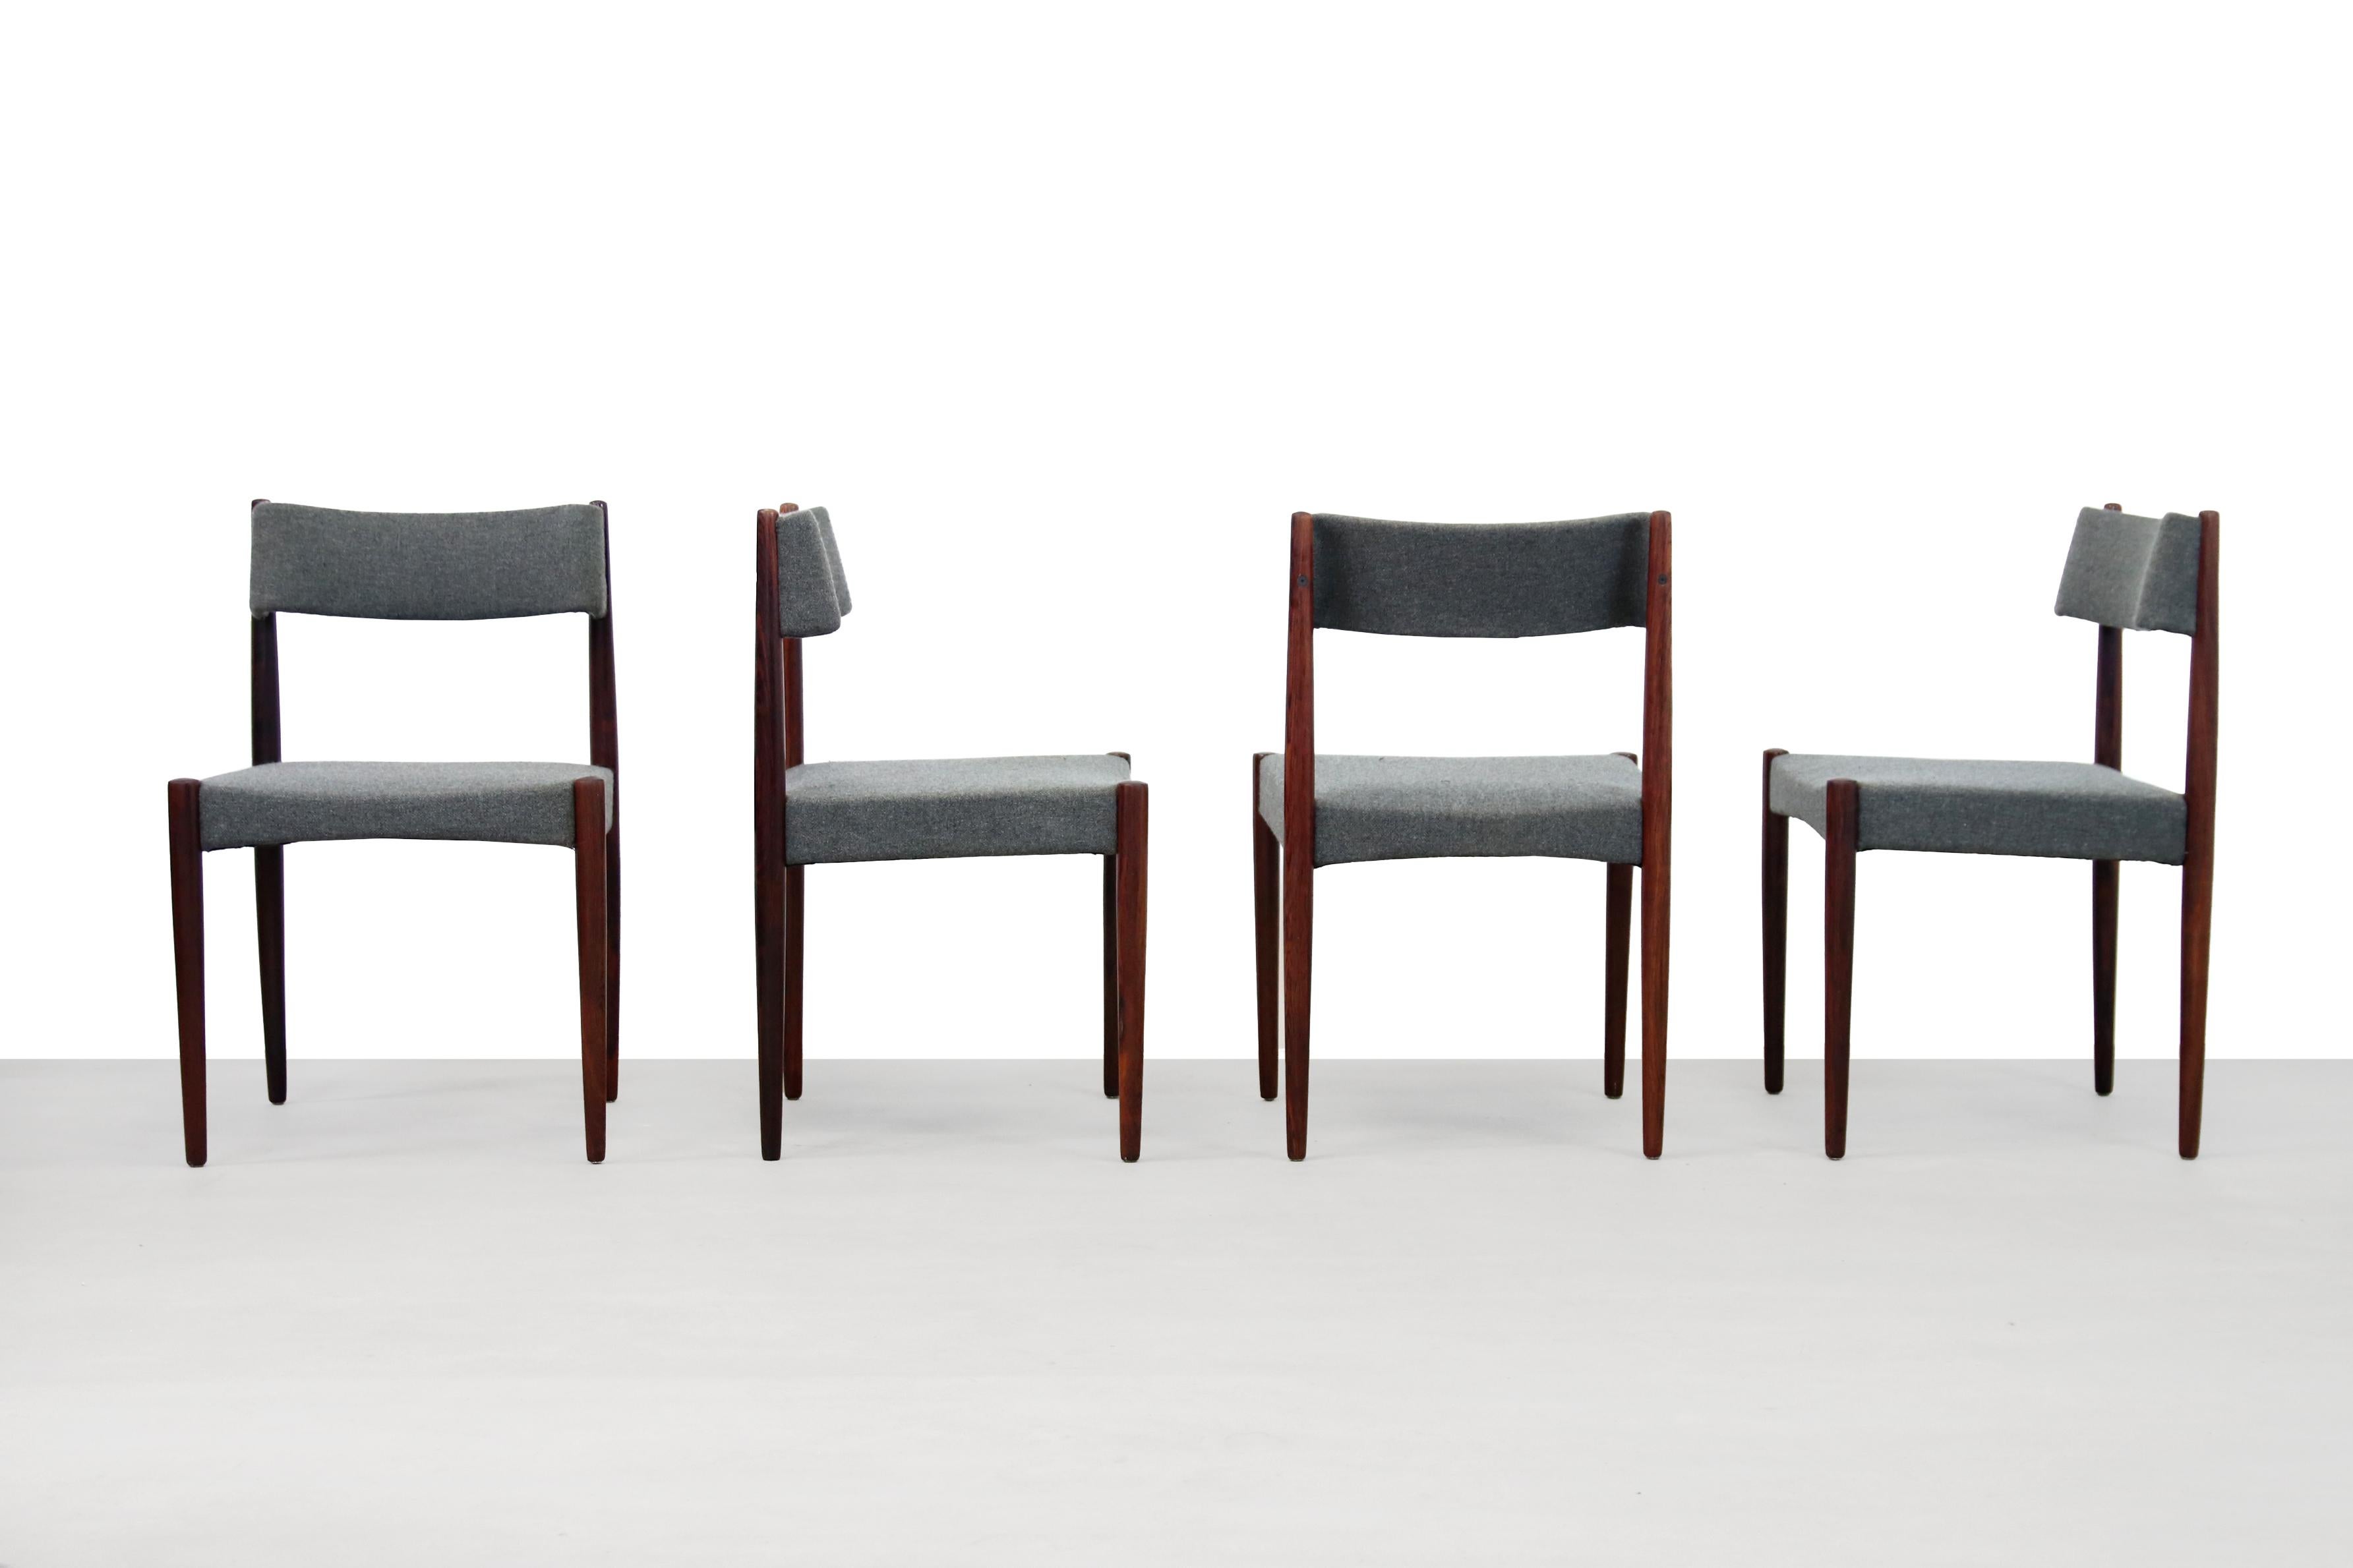 Very beautiful rosewood dining room chairs from Bovenkamp. Often attributed to Aksel Bender Madsen. The backrests are beautifully designed and give good support to the back. The chairs have been reupholstered in an anthracite gray wool furniture